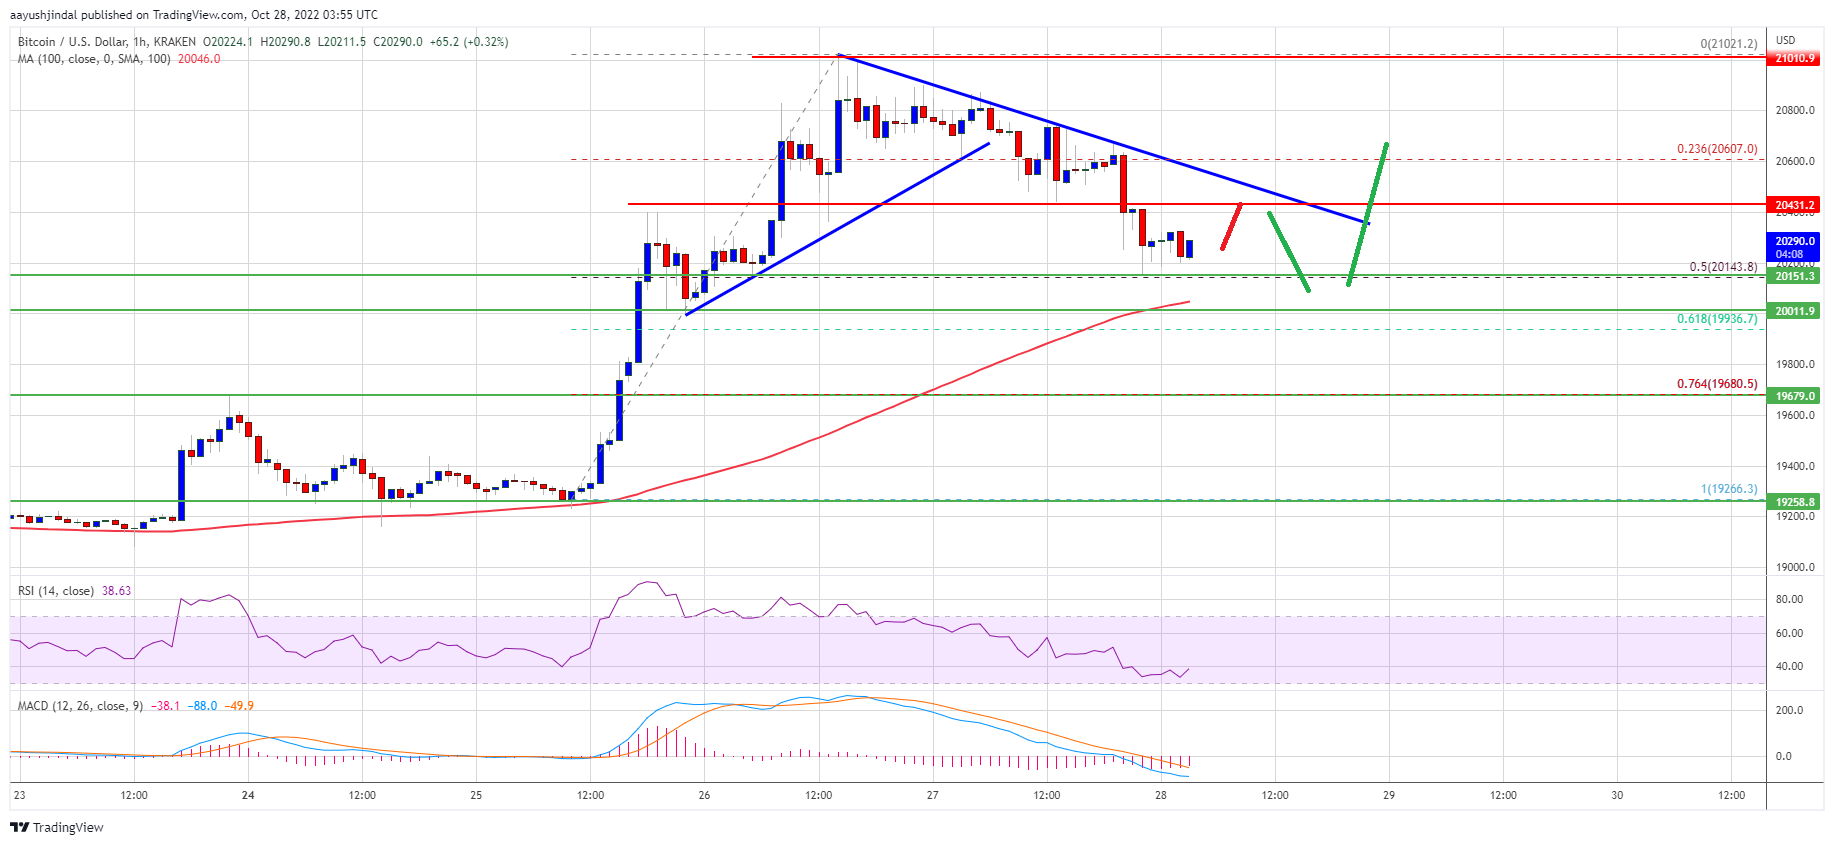 Bitcoin Price Just Saw Technical Correction, Why BTC Could Rise Again